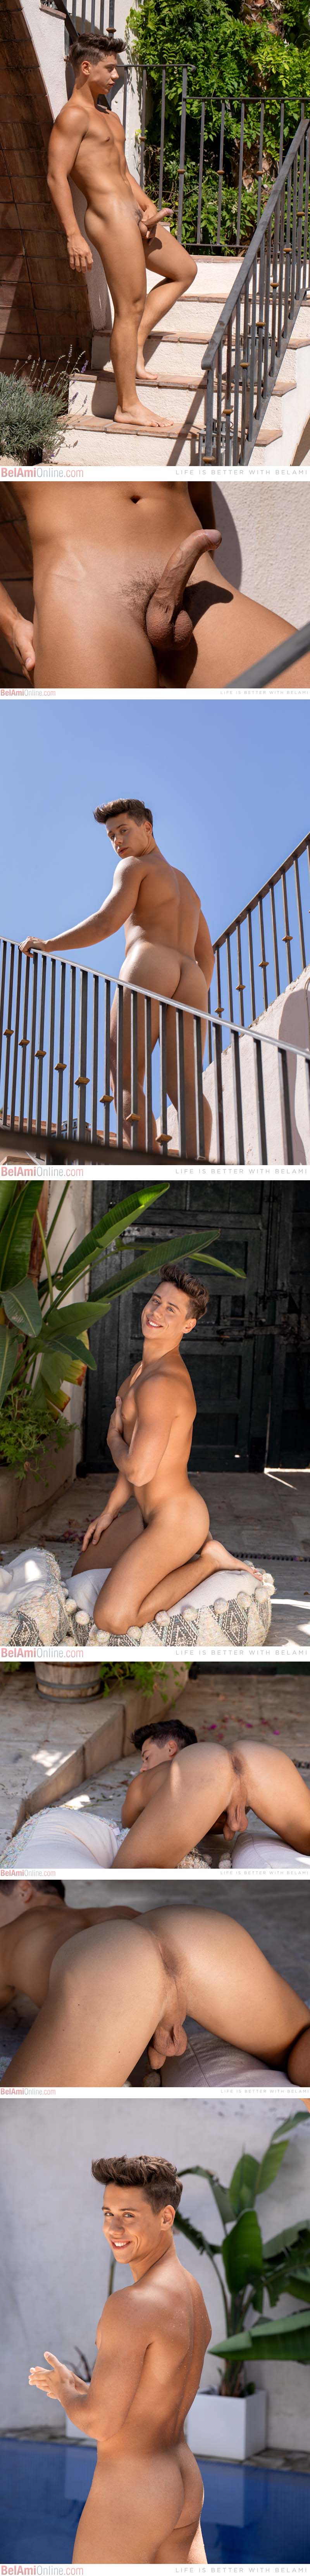 Tommy Clapton [Model of the Week Solo] at BelAmiOnline